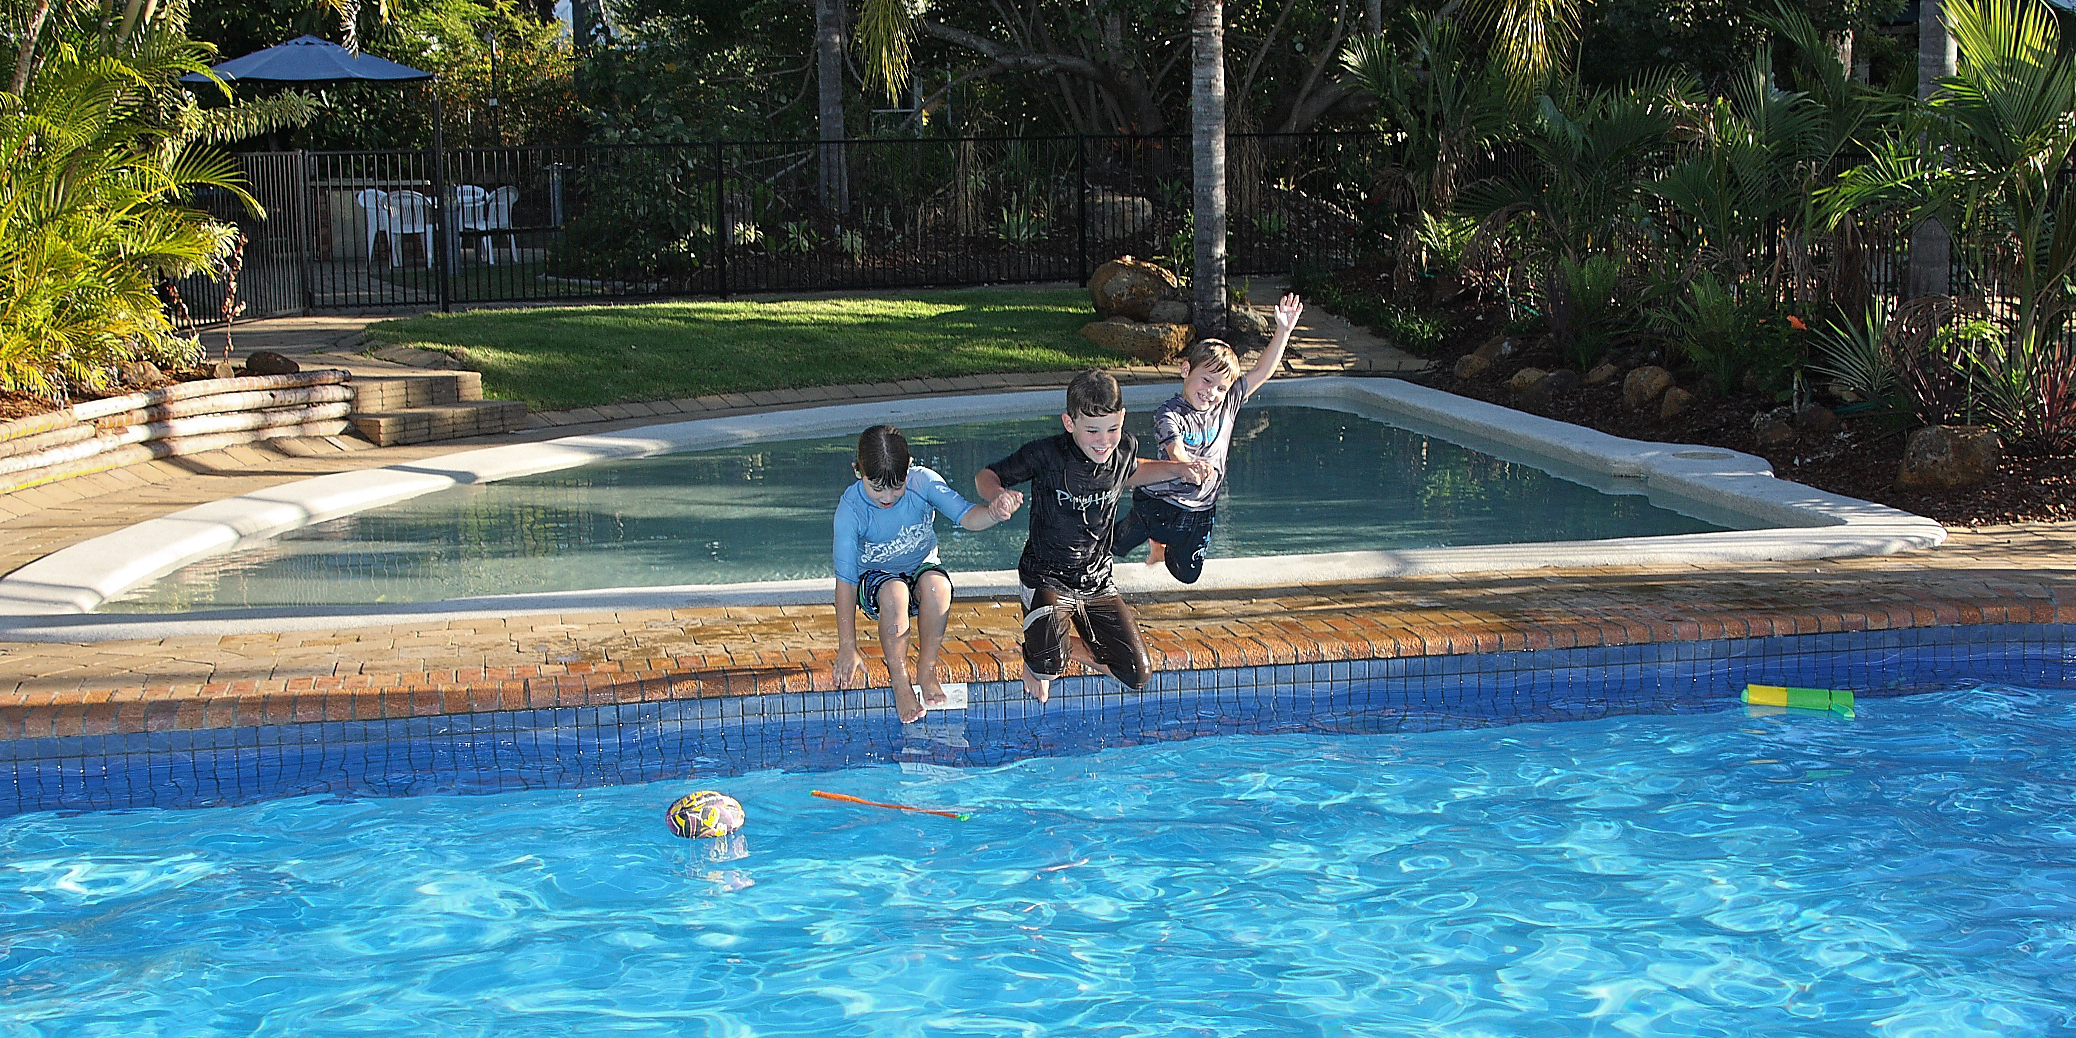 Make the Most of Your School Holidays at Kelly's Beach Resort Bargara